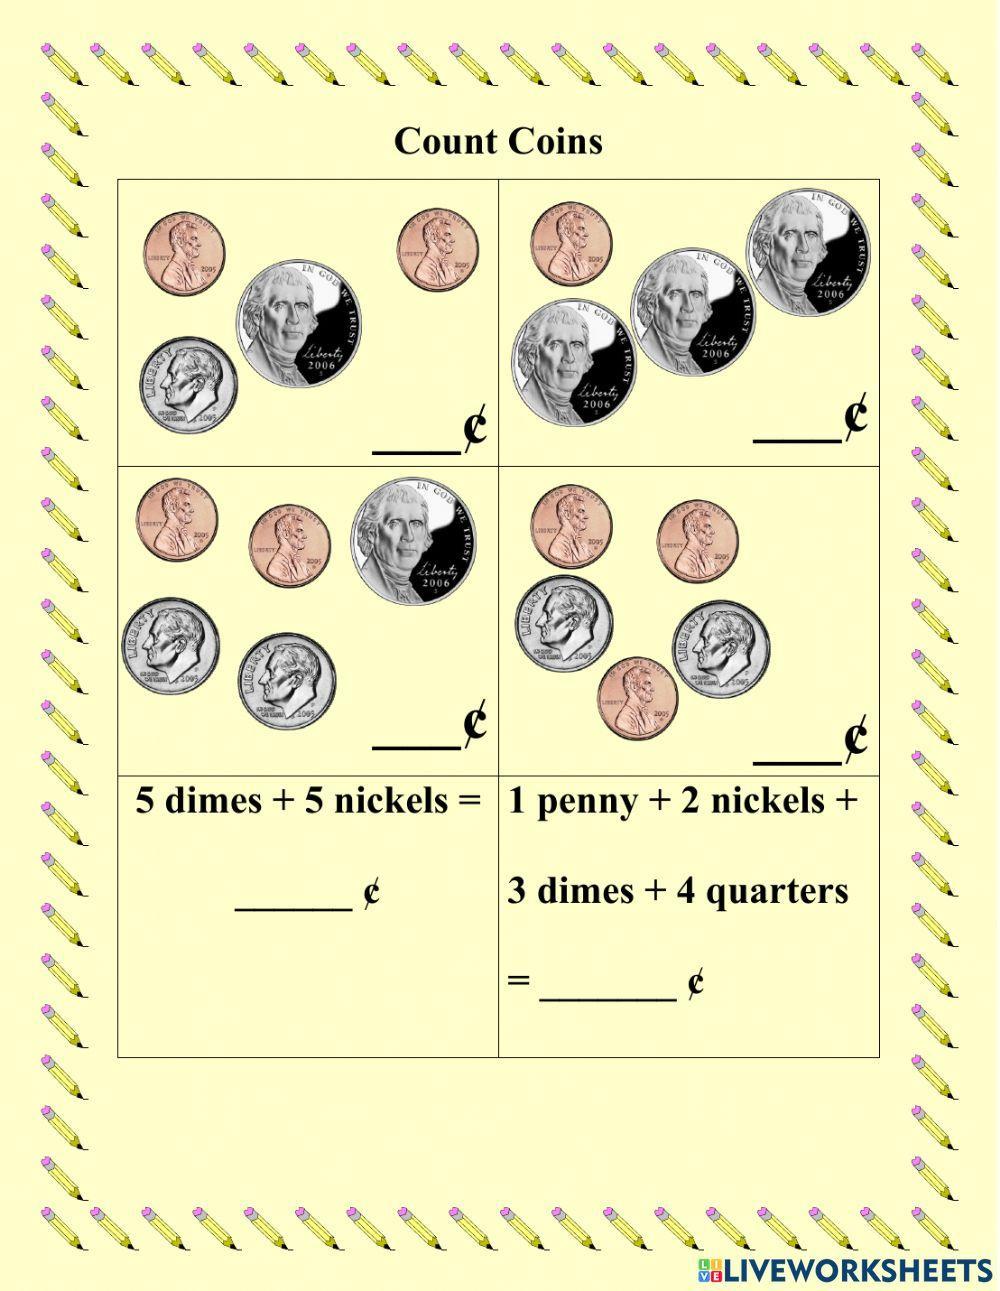 Count Coins